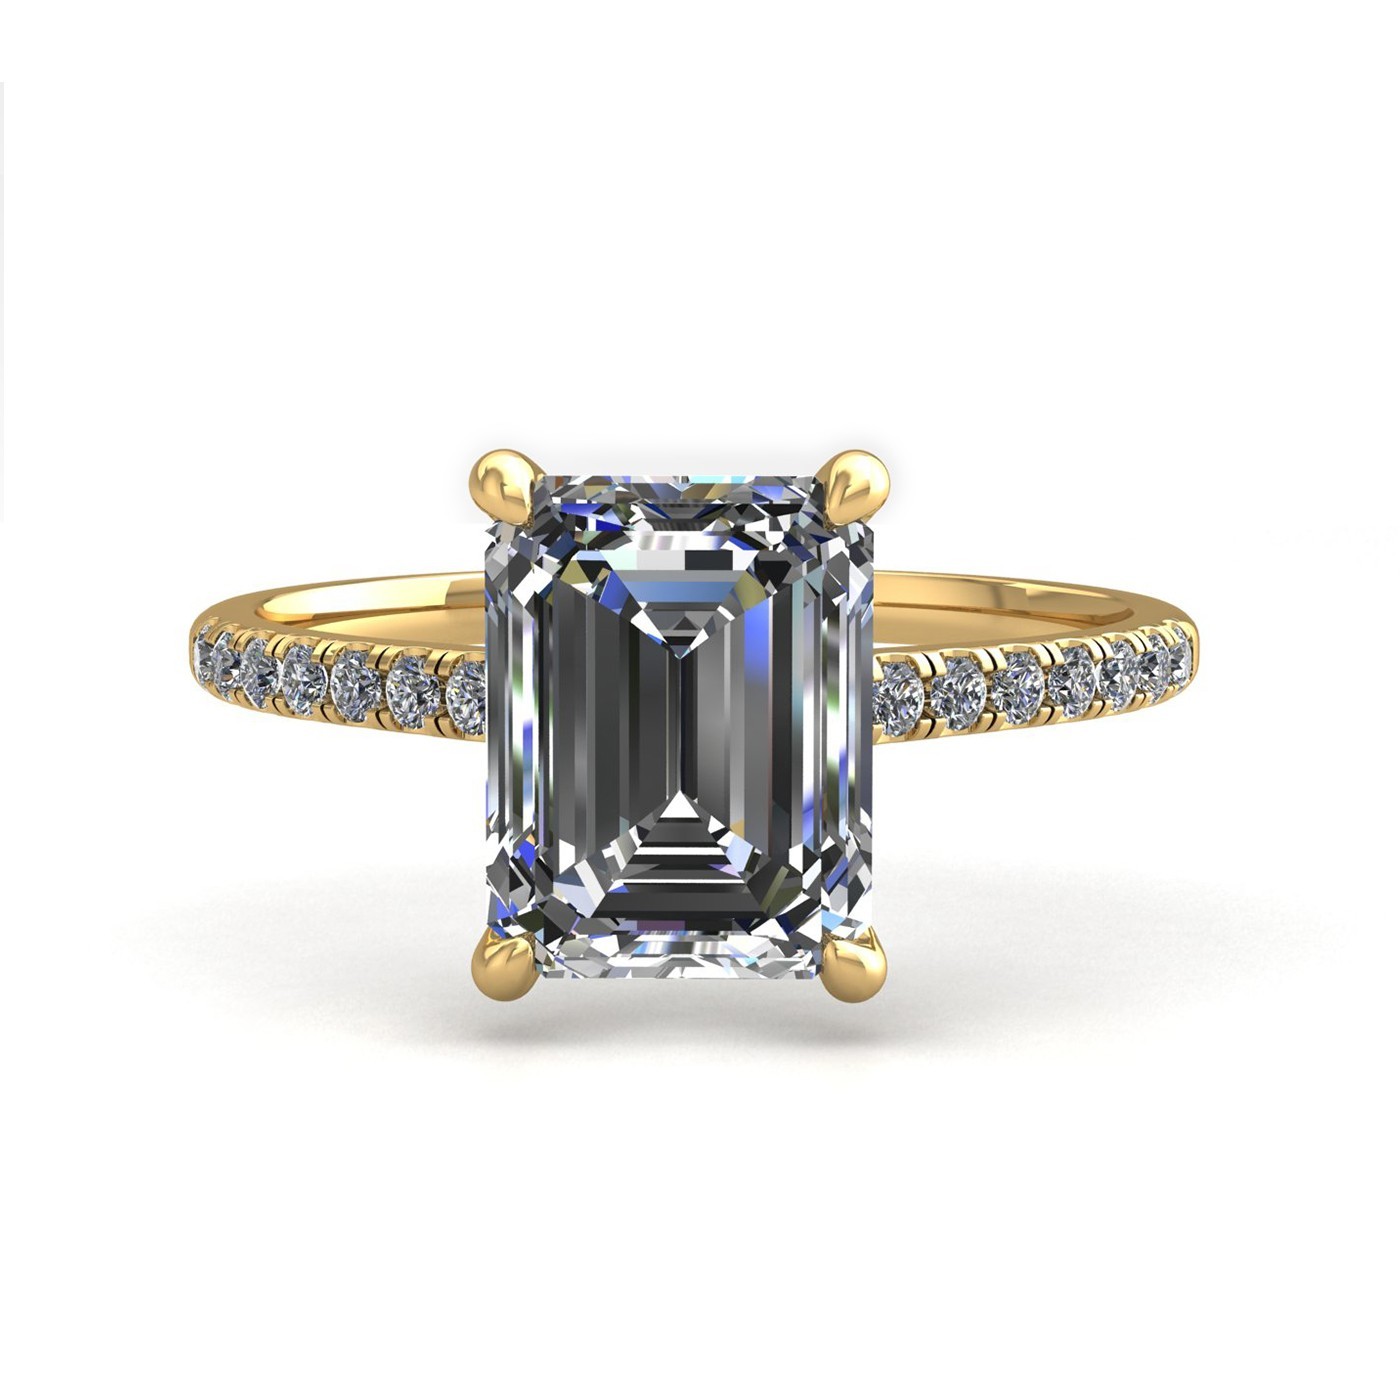 18k yellow gold  0,50 ct 4 prongs emerald cut diamond engagement ring with whisper thin pavÉ set band Photos & images